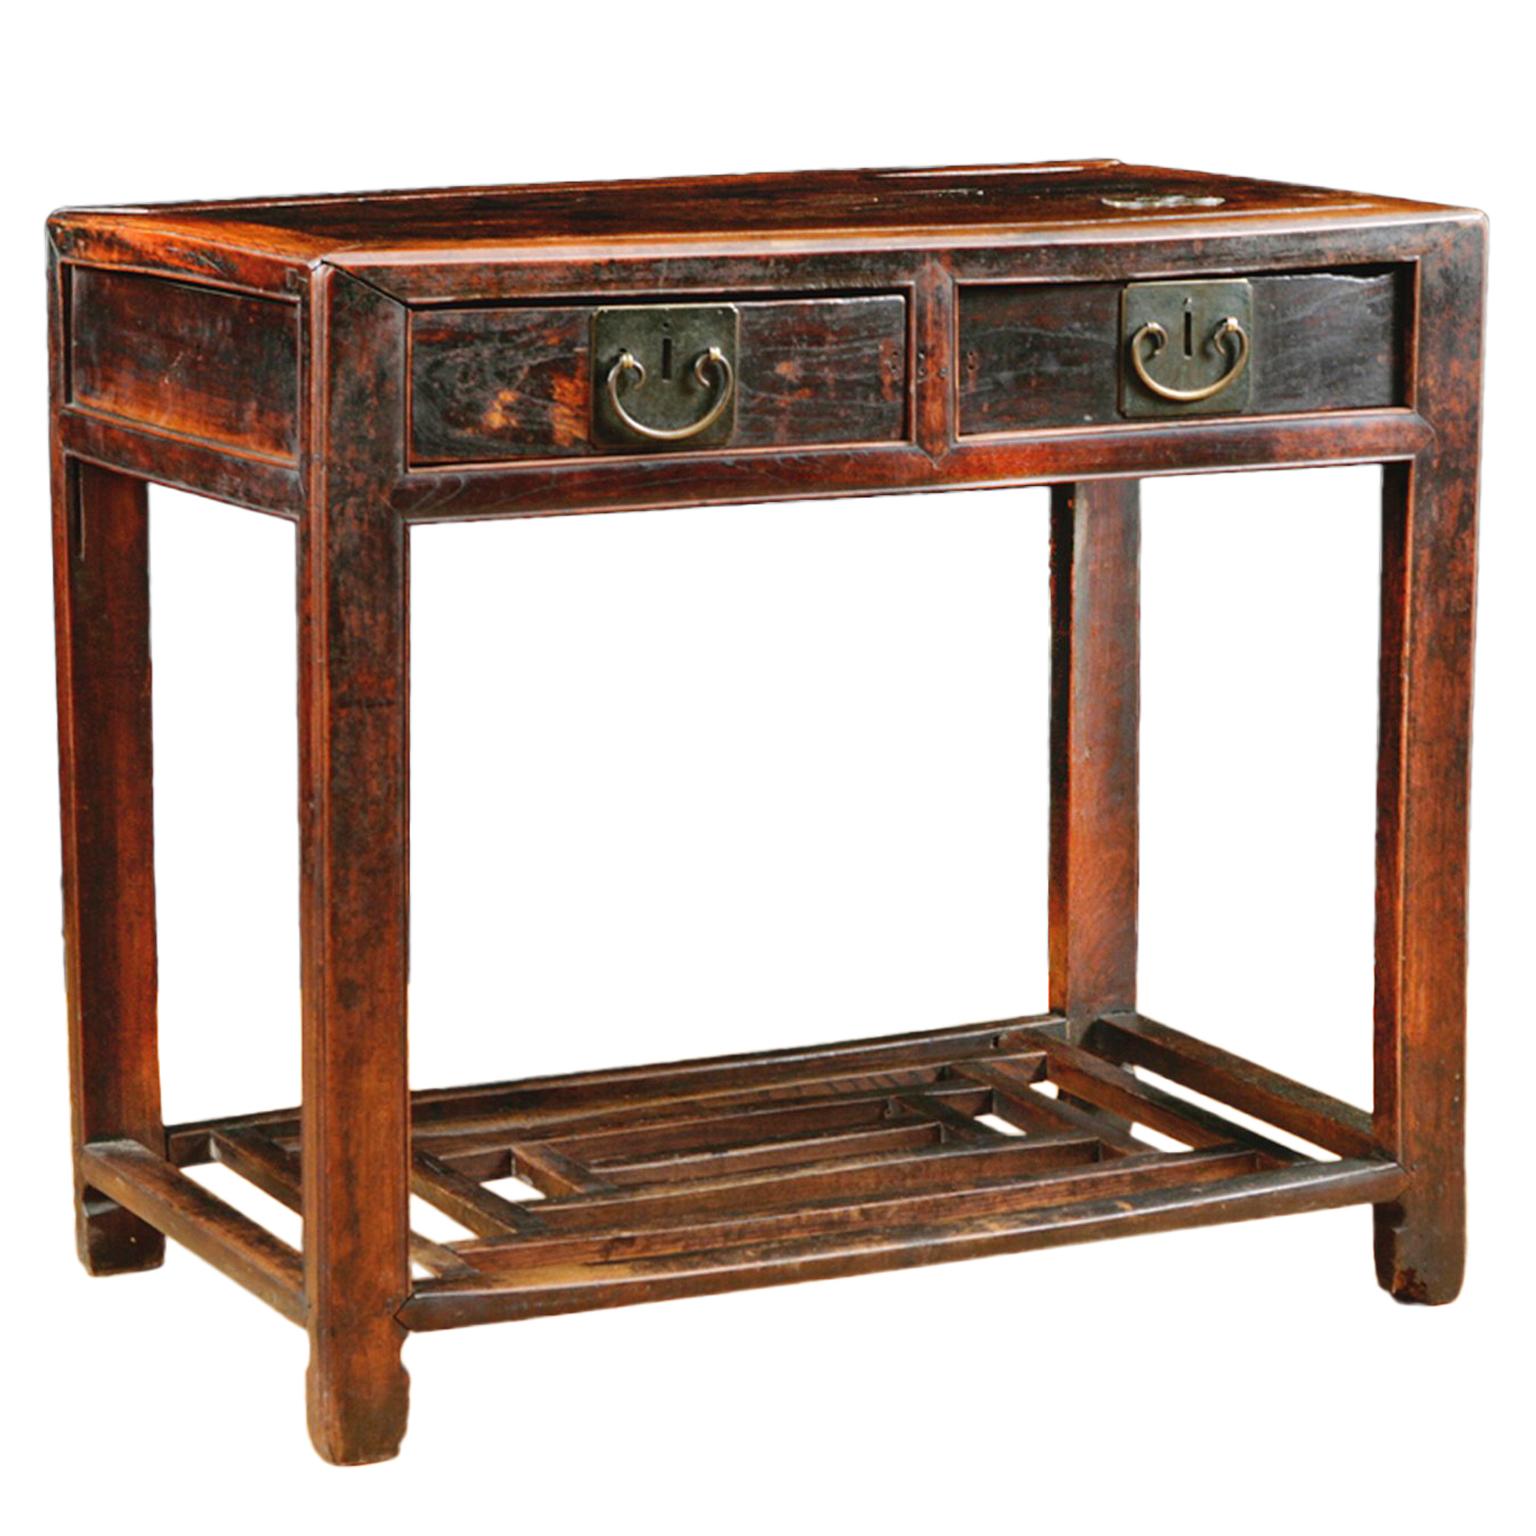 Chinese Table in Elm with Original Cinnabar Lacquer, circa 1790 Qing Dynasty